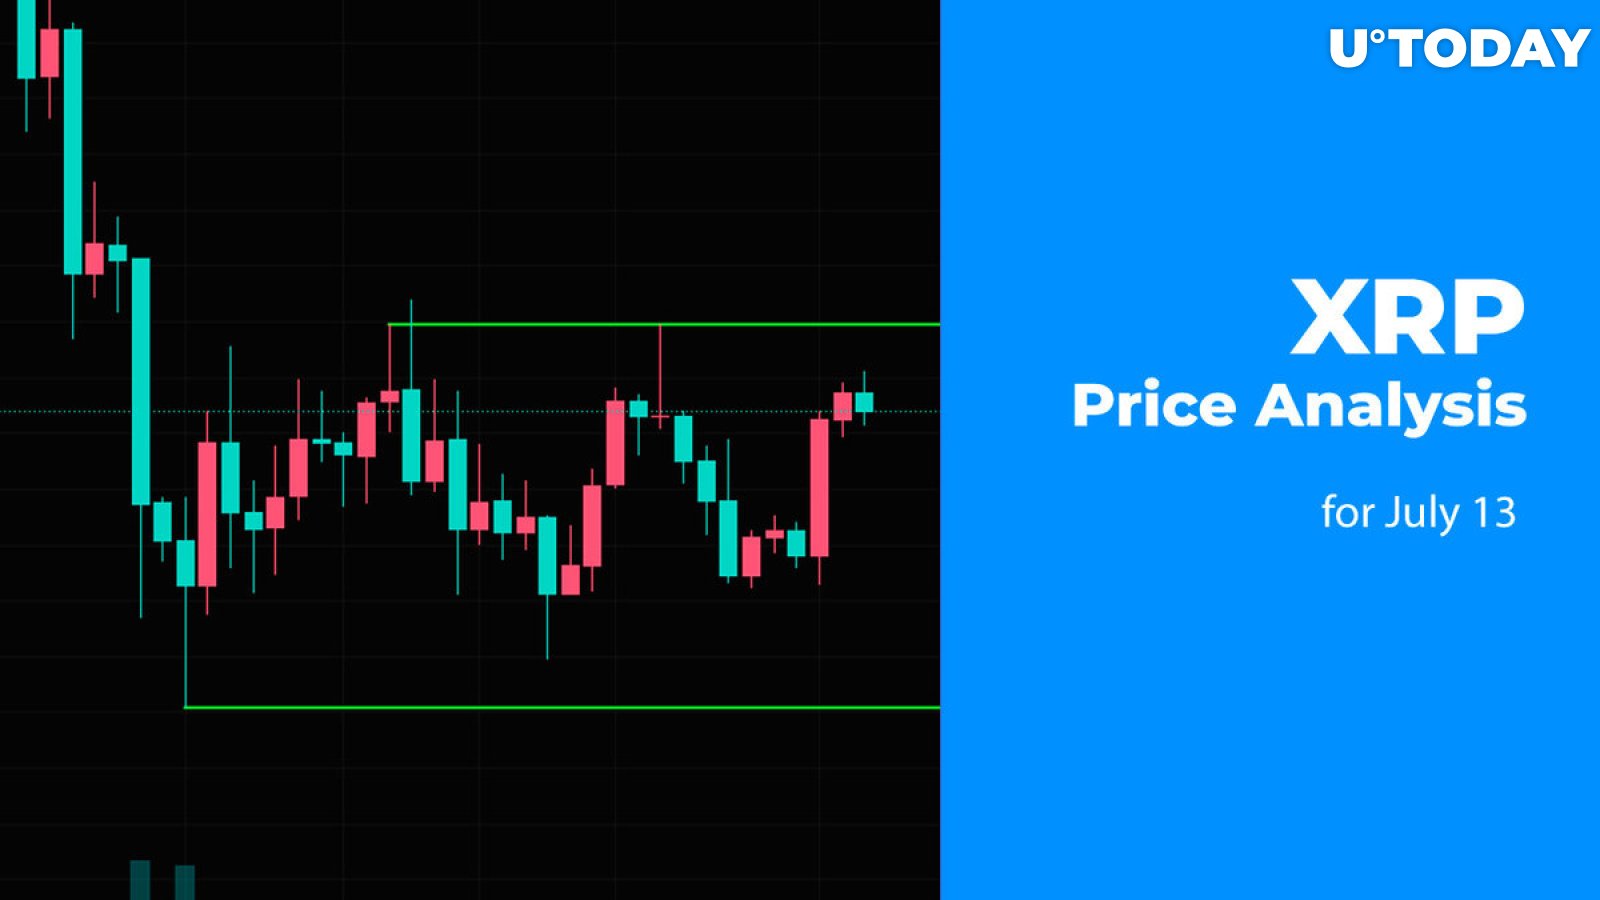 XRP Price Analysis for July 13